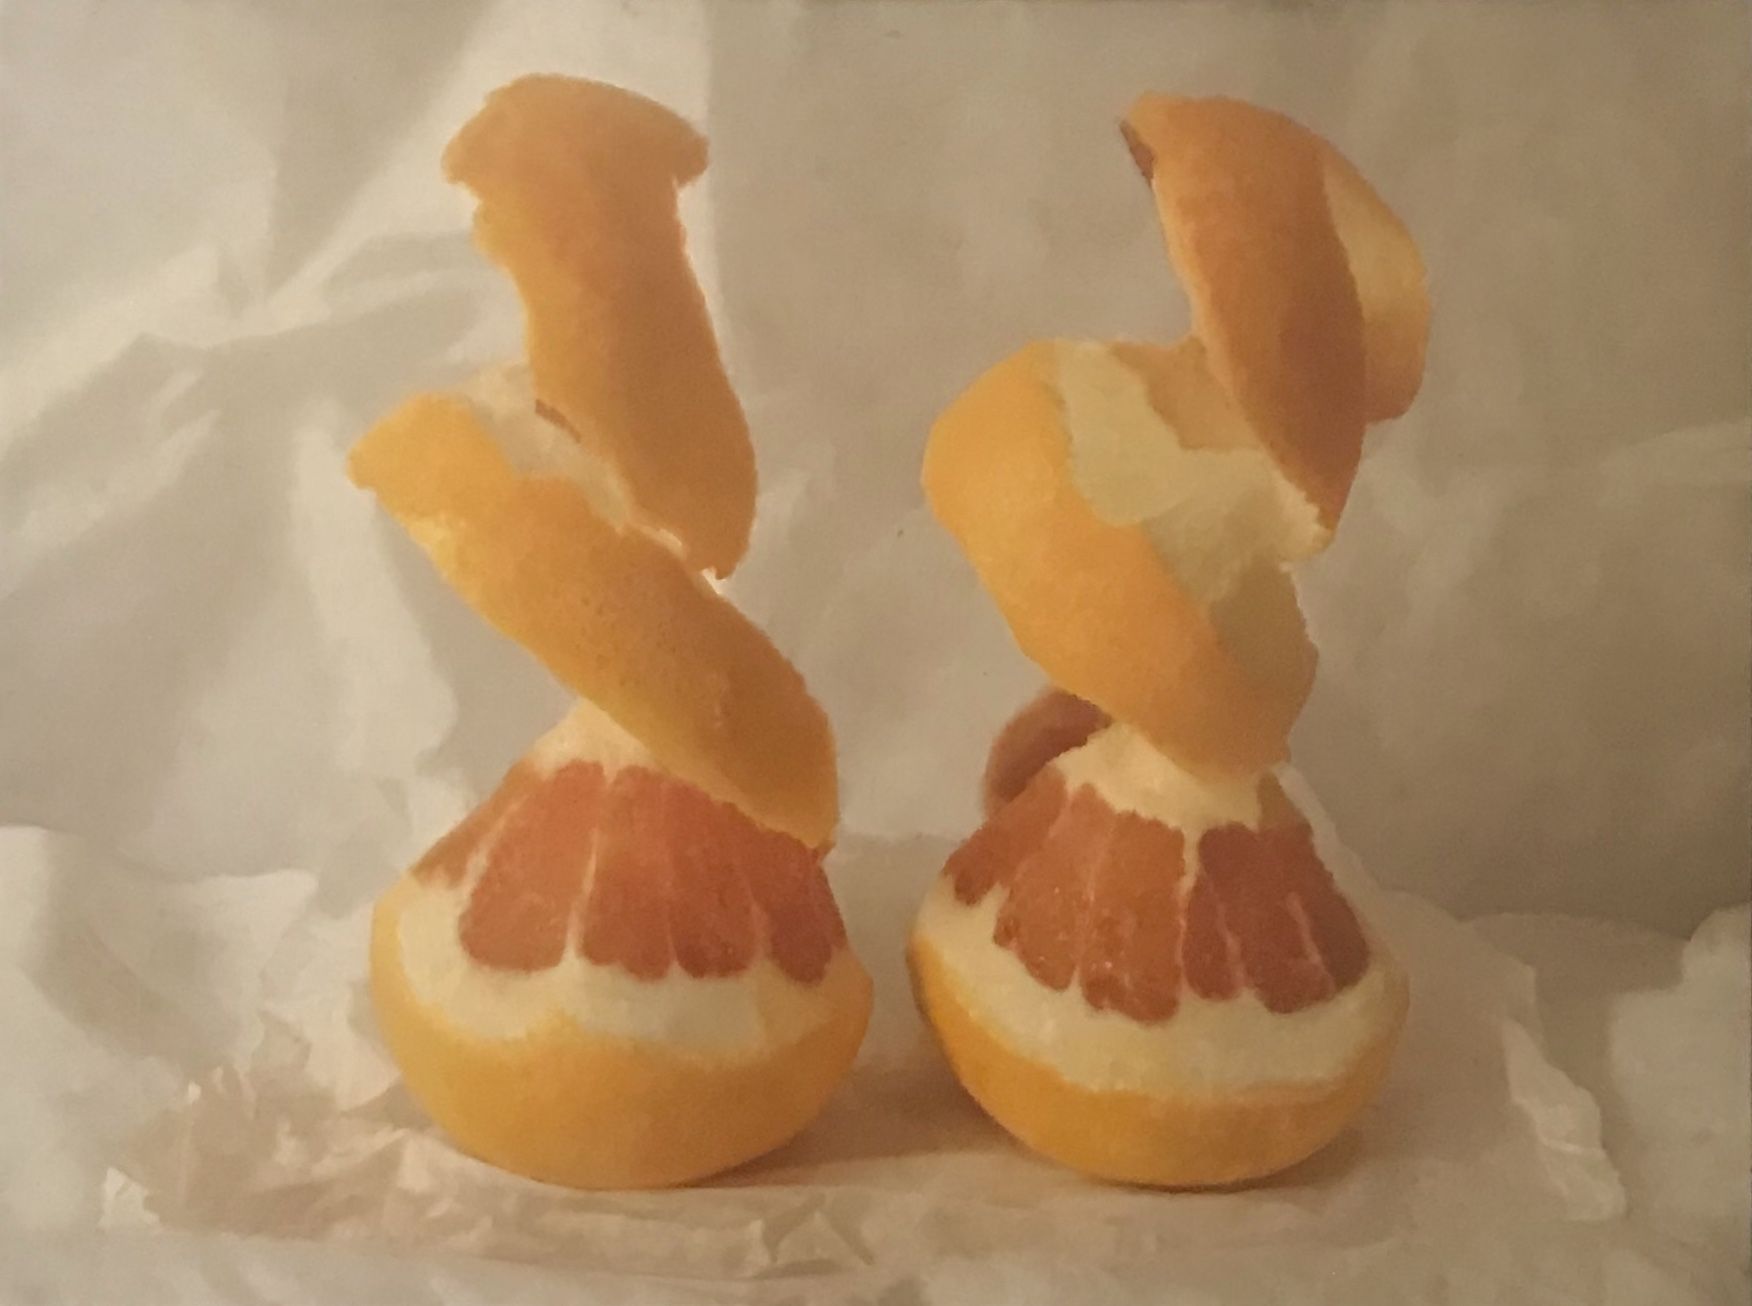 Two Peeled Oranges by Kate Verrion